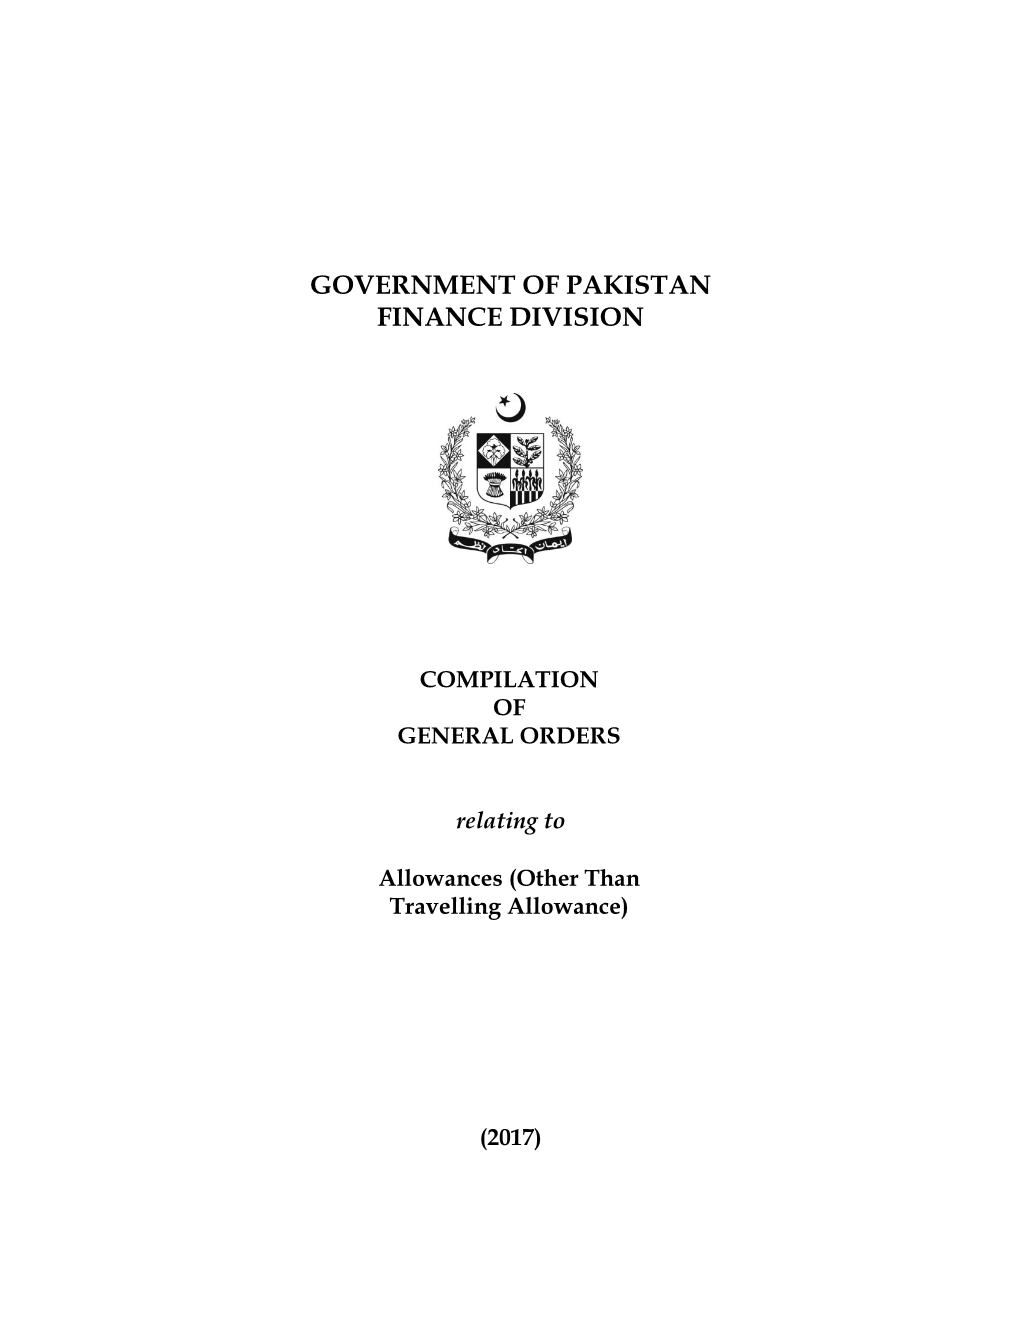 Compilation of General Orders Relating to Various Allowances